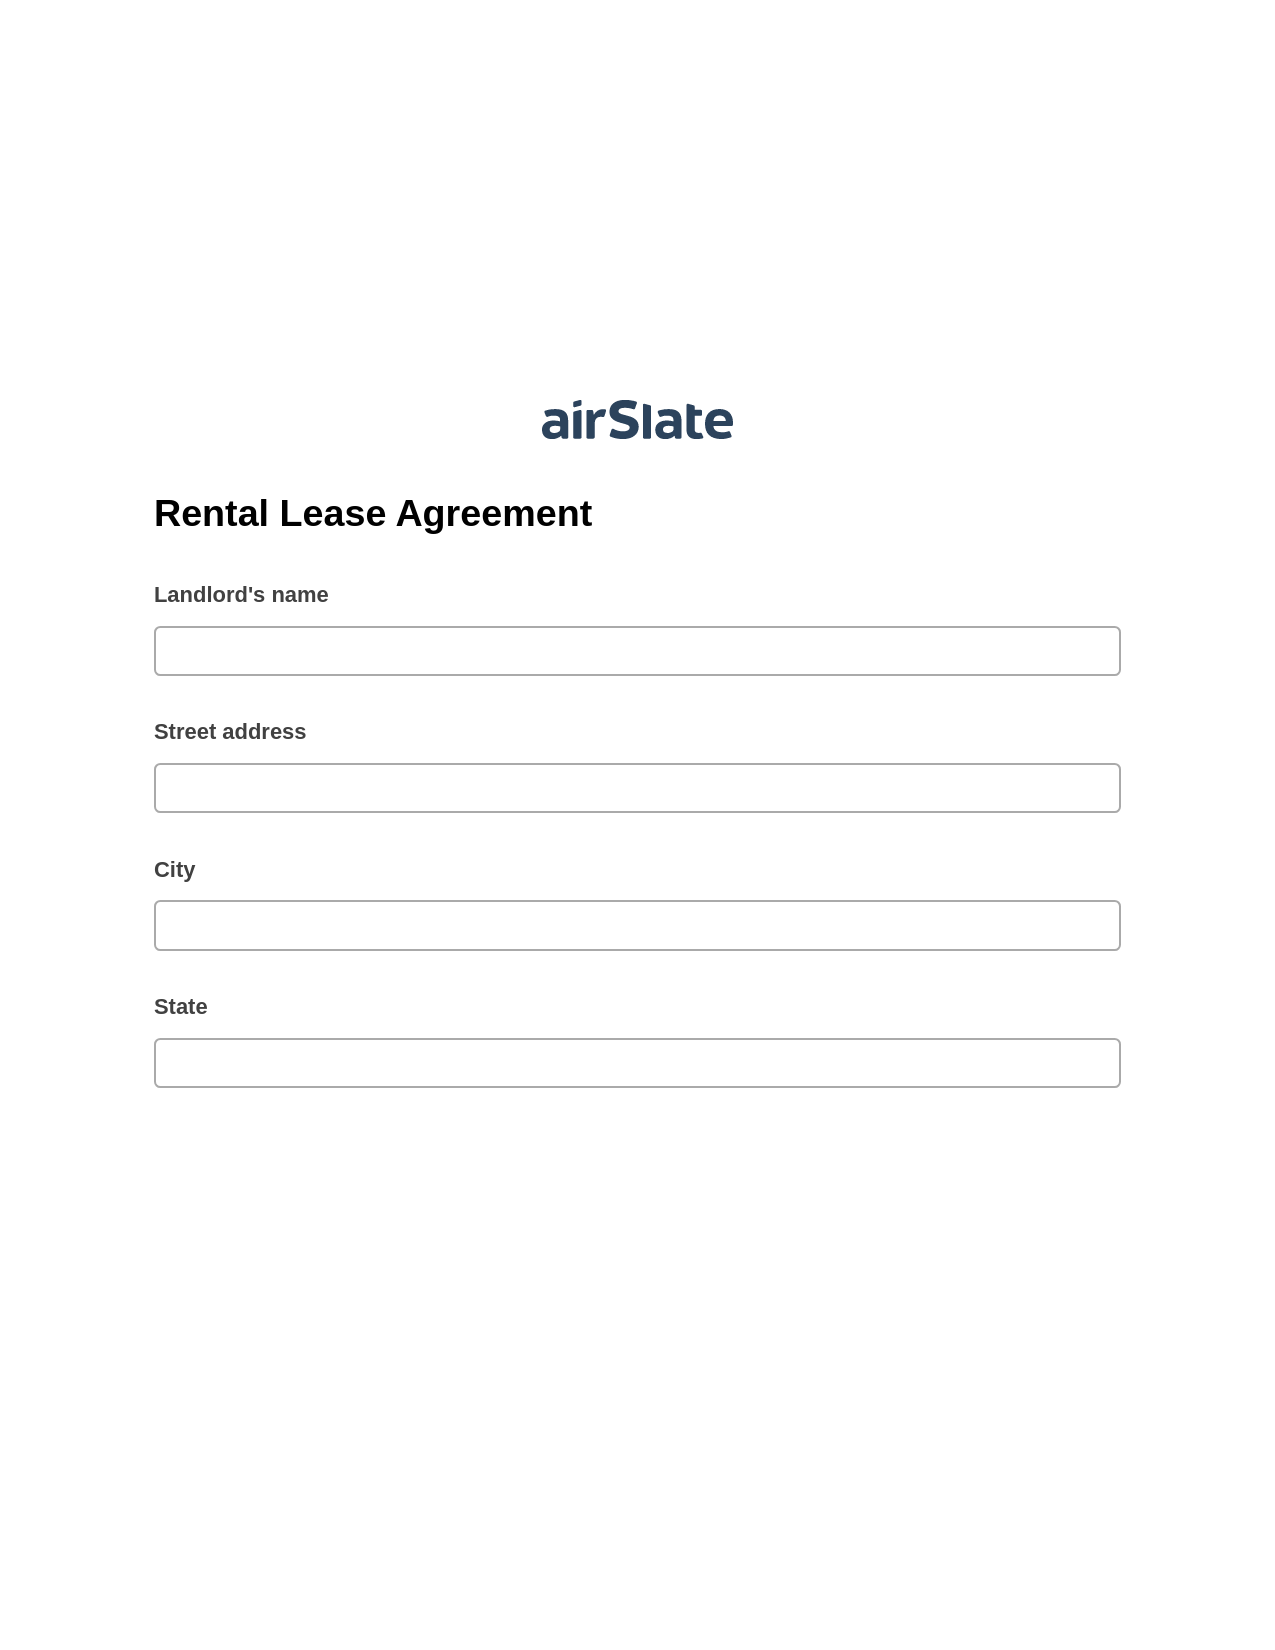 Multirole Rental Lease Agreement Pre-fill from CSV File Dropdown Options Bot, Document Hide Bot, Export to NetSuite Record Bot